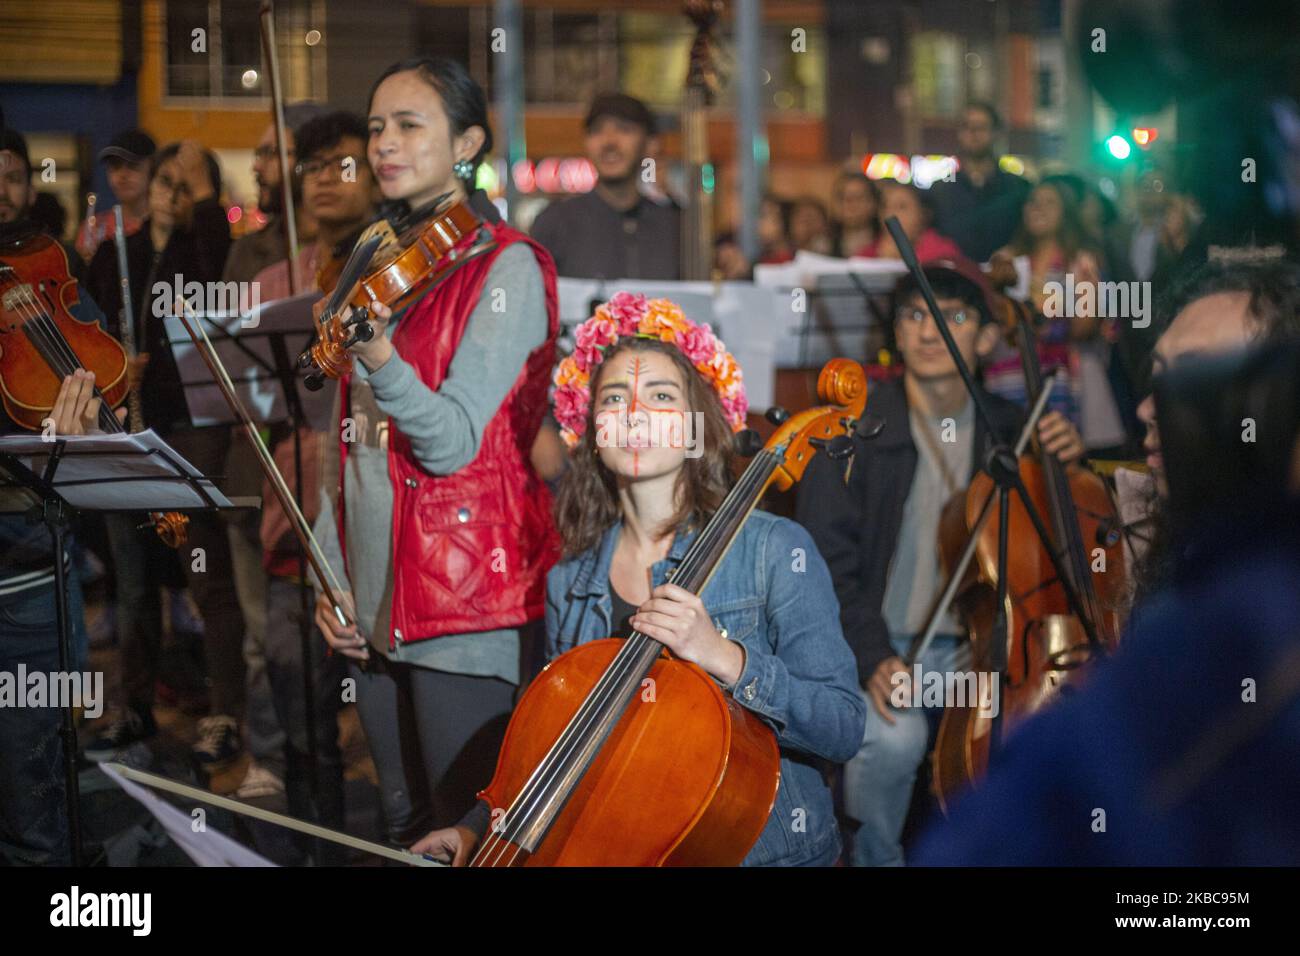 The philharmonic in a tribute they made to the indigenous guard of Cauca in the city of Bogota, Colombia on 4 December 2019. This is the third national strike in two weeks amid ongoing protests against social, security and economic policies of President Ivan Duque. Five people have died in connection with the protests since November 21. (Photo by Daniel Garzon Herazo/NurPhoto) Stock Photo